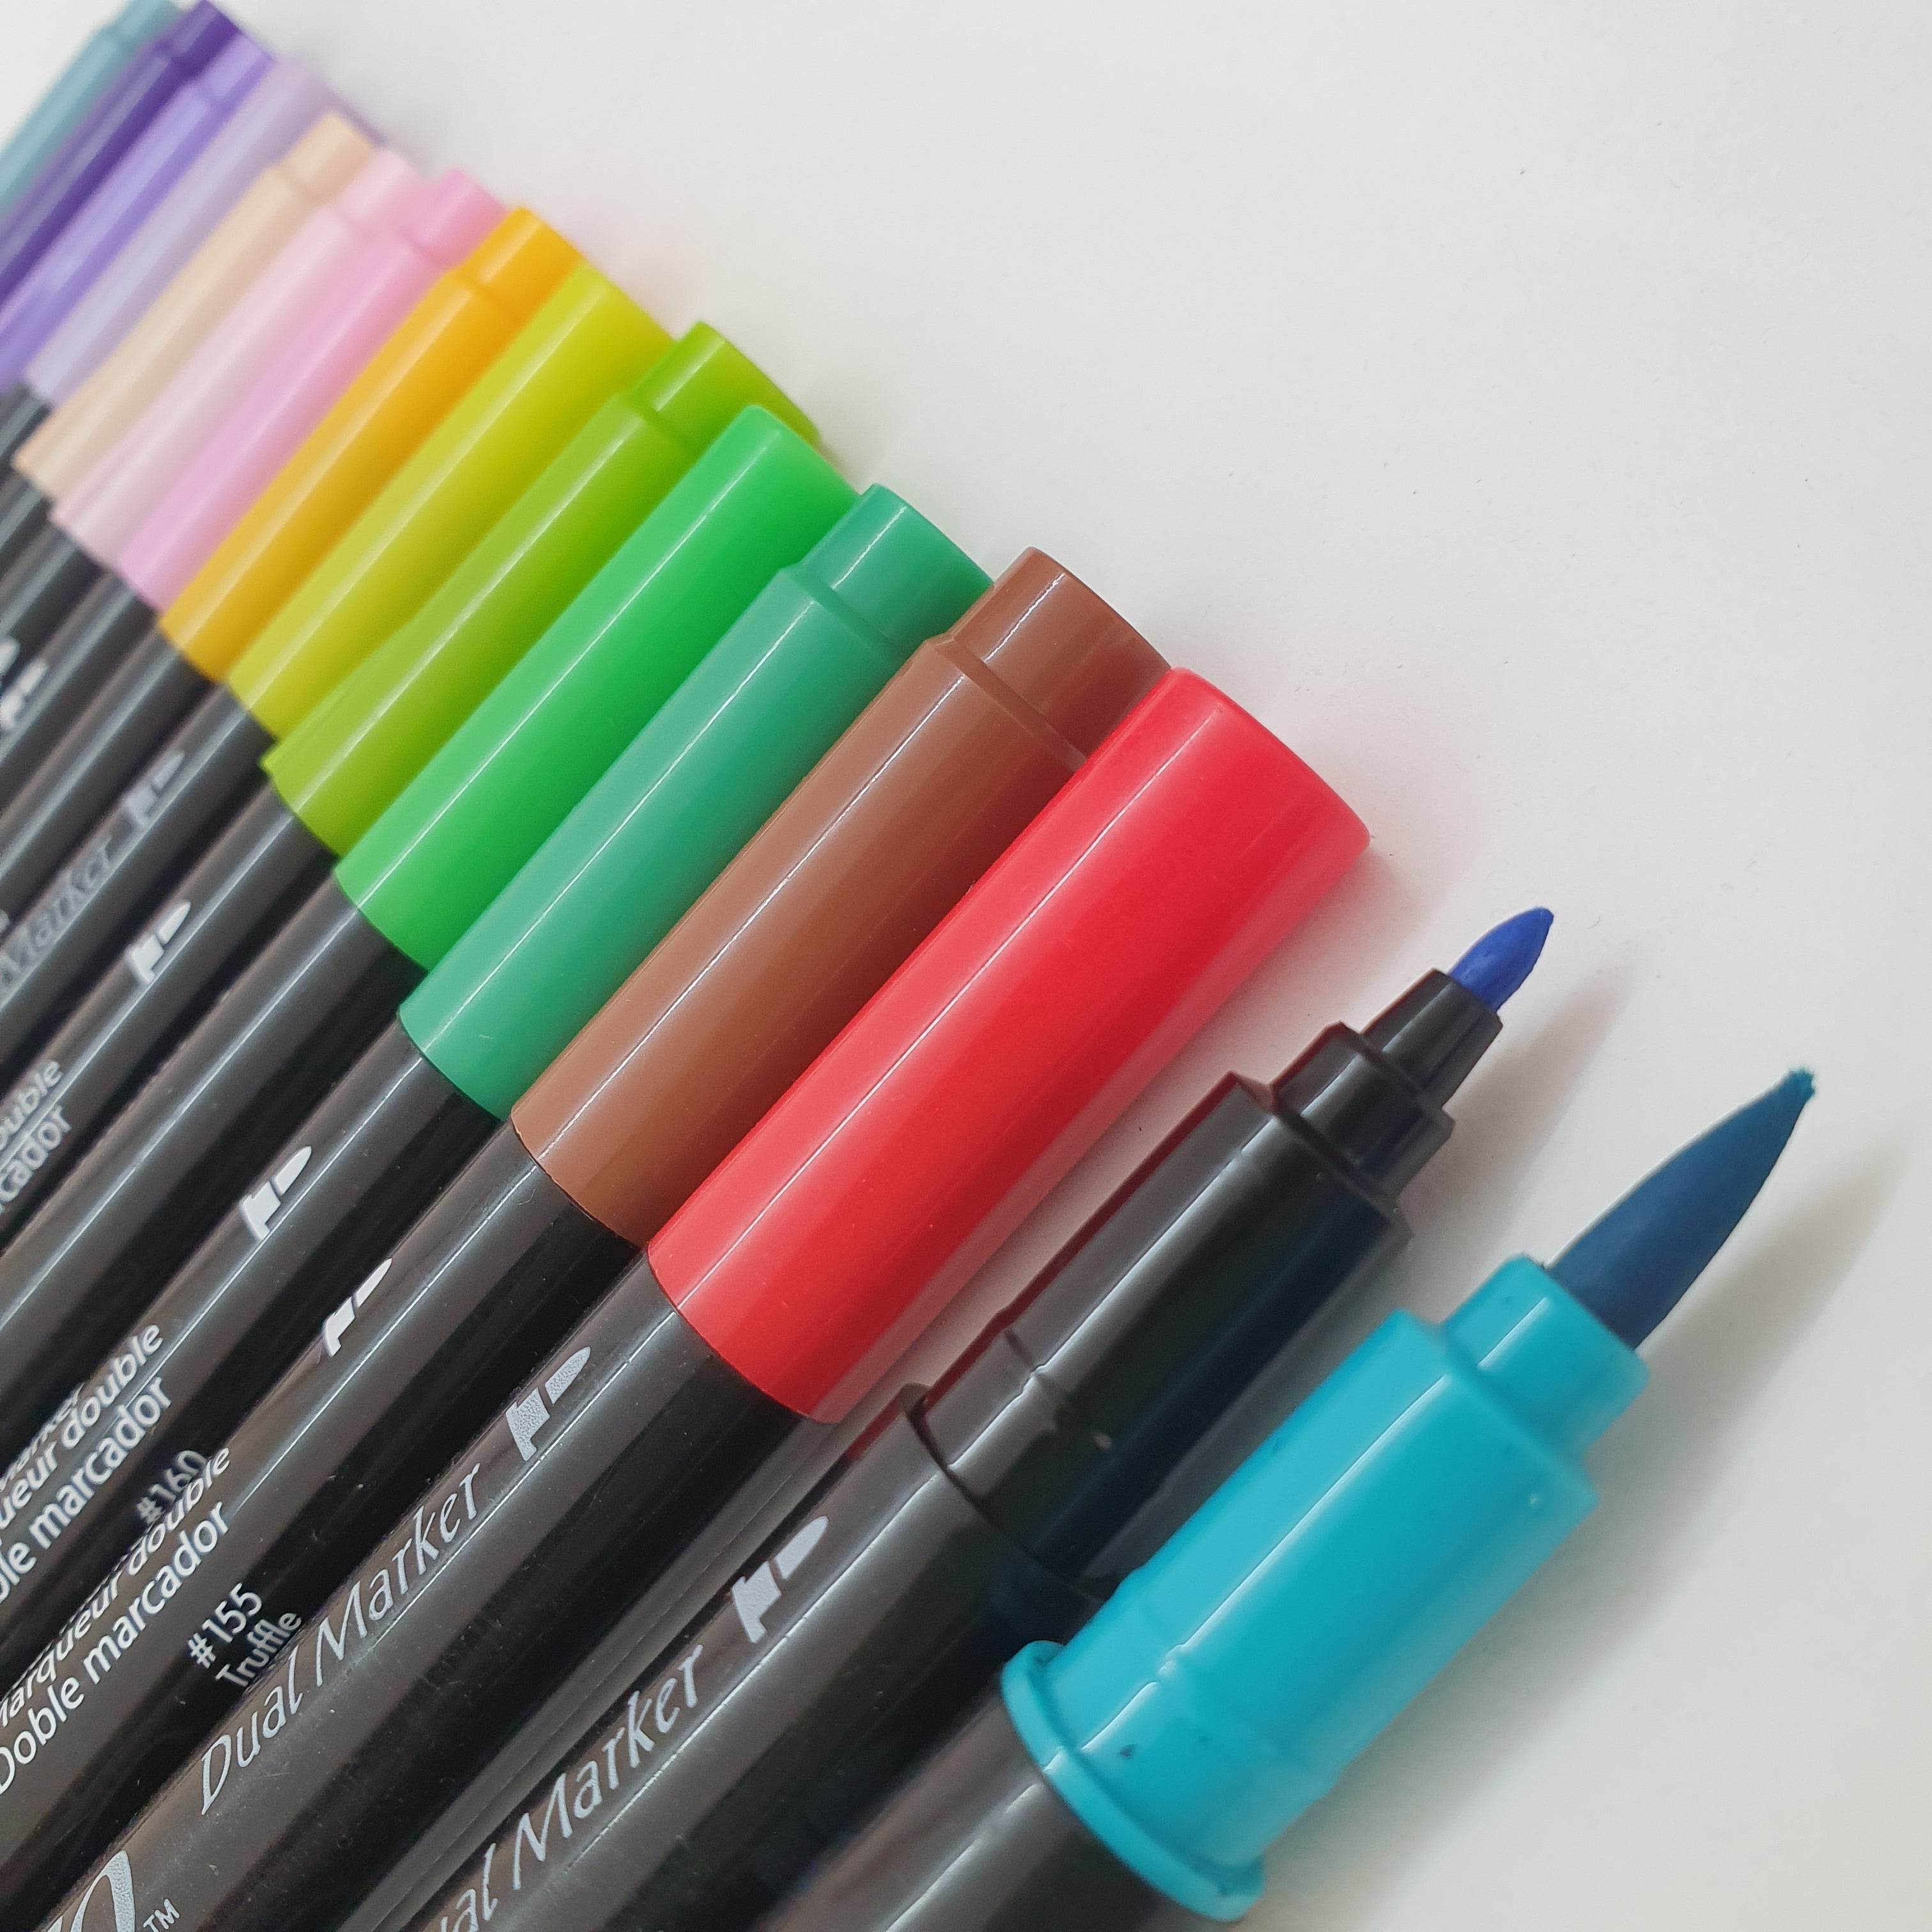 Buy Any 2 X Dylon Fabric Marker Pen Online in India - Etsy